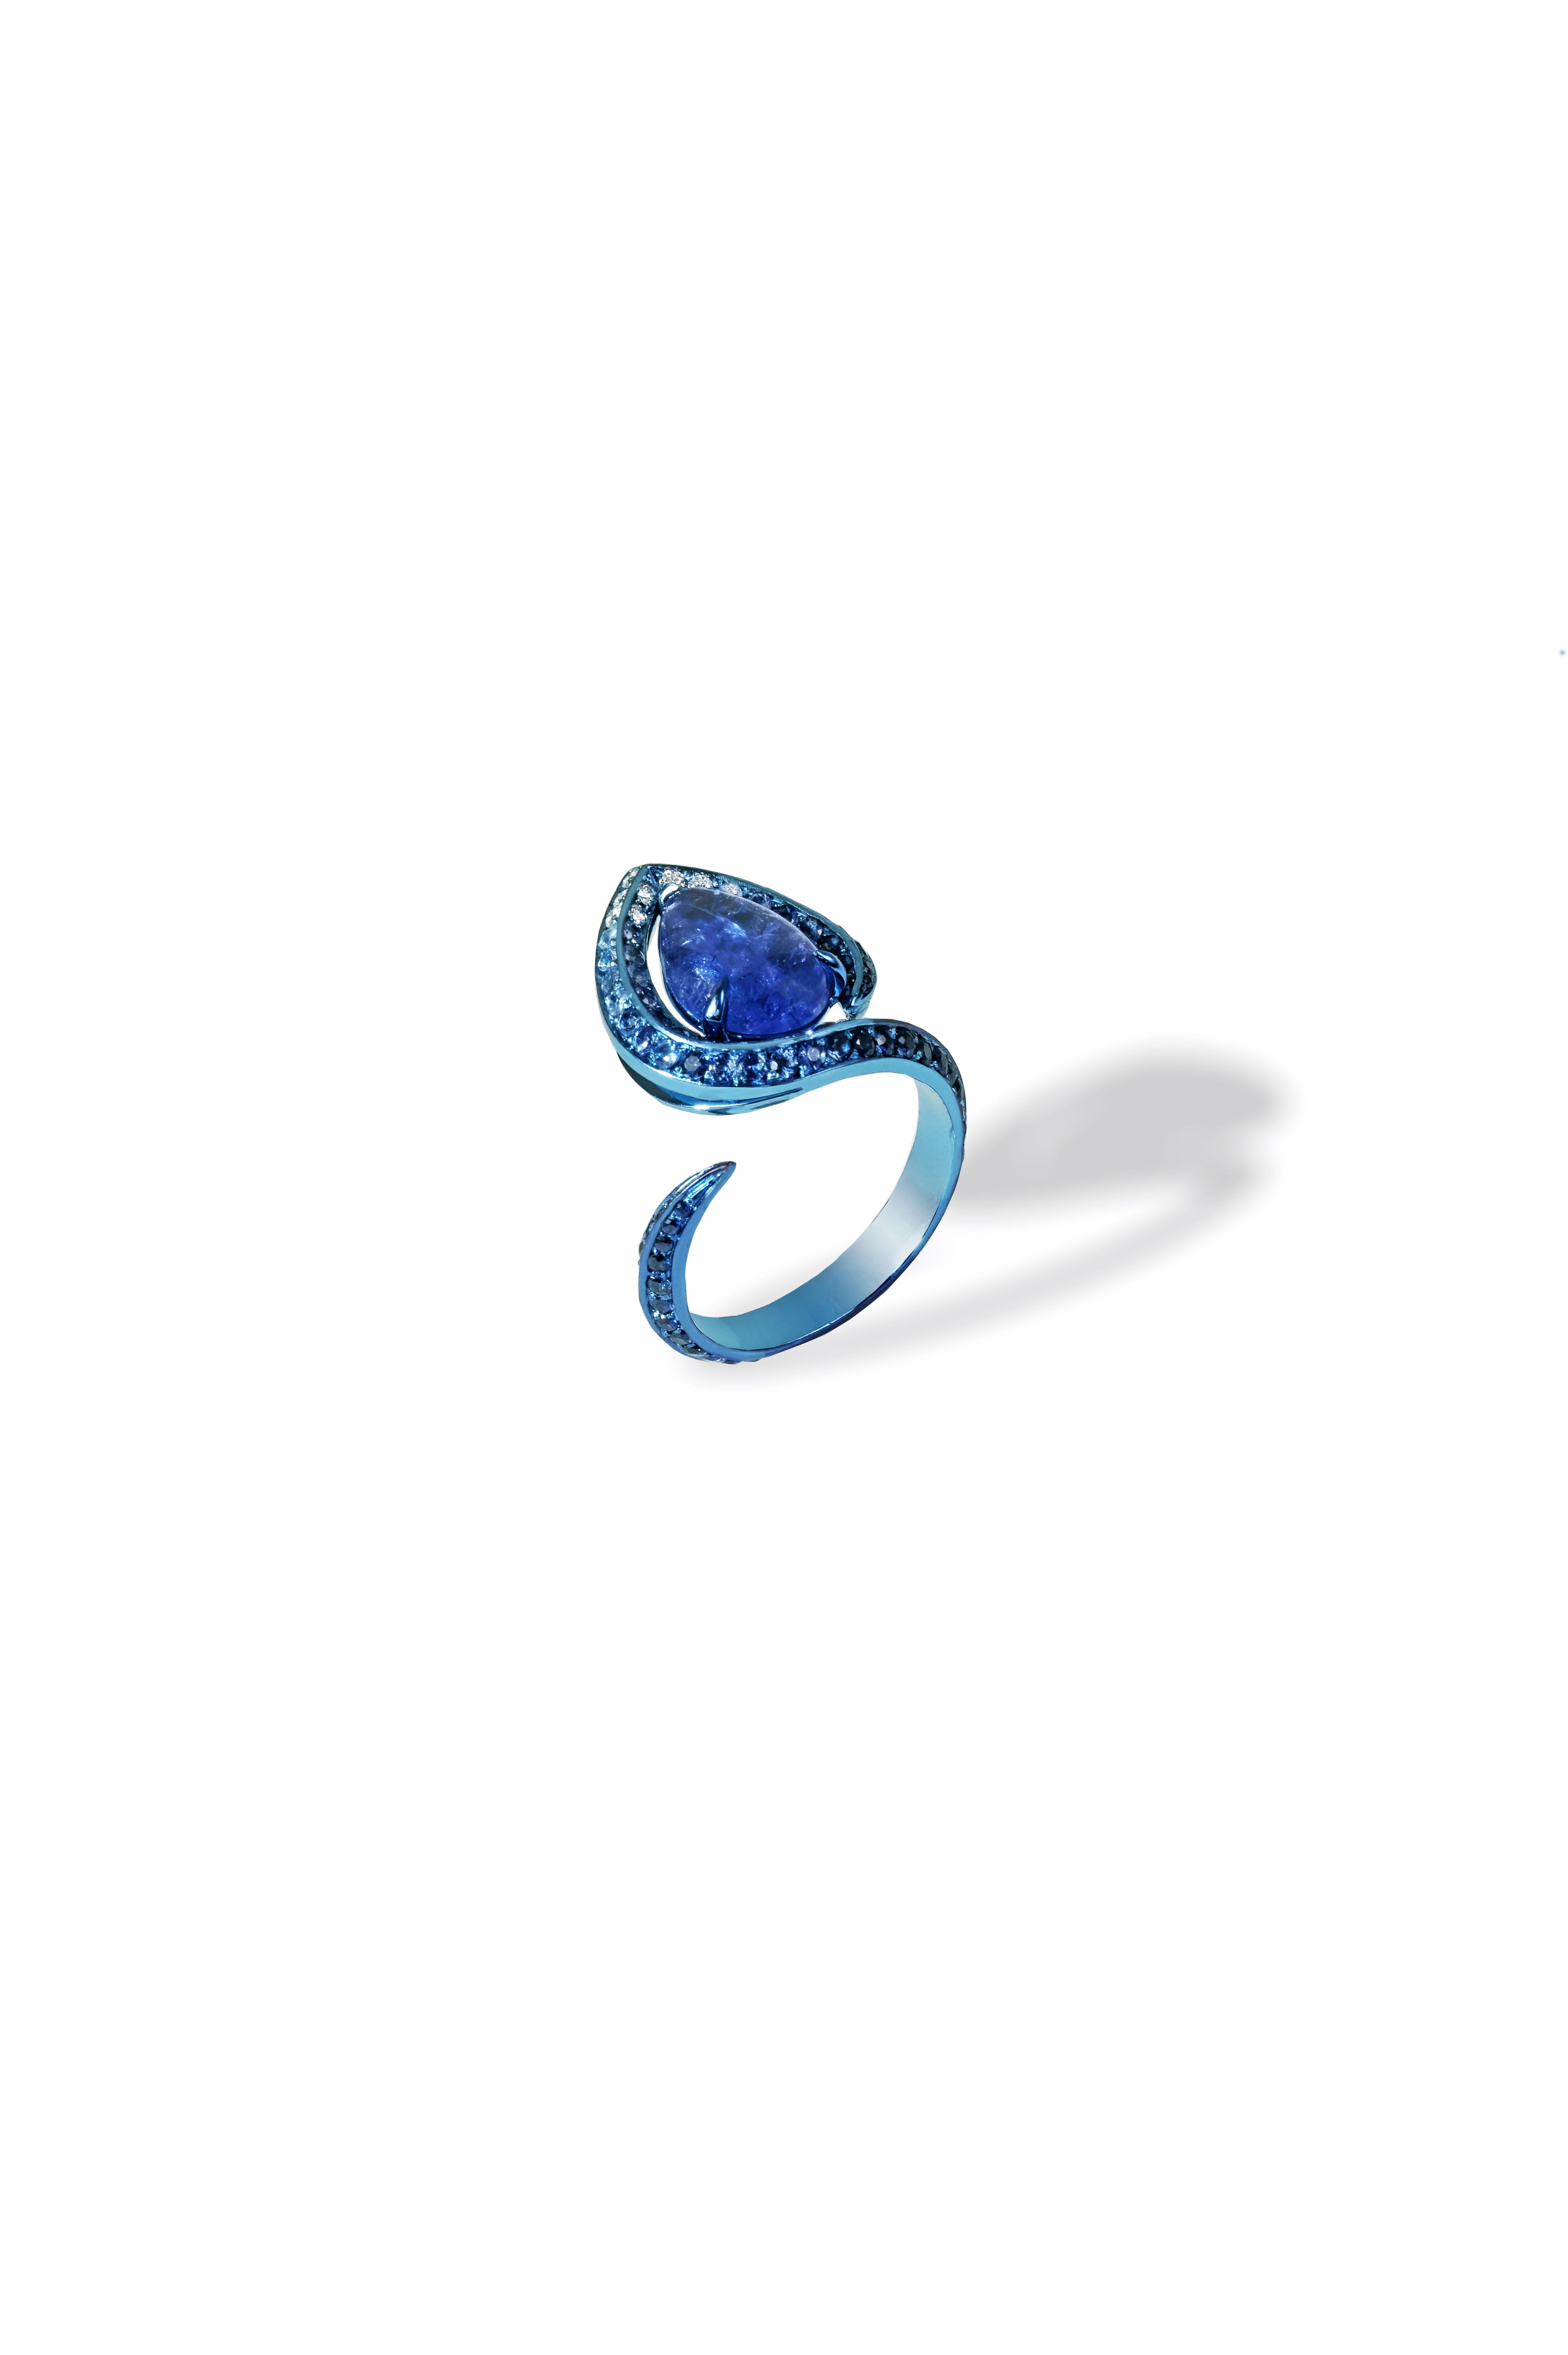 This ring is made to order only. 

Ring hand crafted in Blue Titanium with 119 handset stones: Tanzanite cabochon 2.25 ct., Sapphires 1.87 ct., White Diamonds 0.12 ct. Intricate work in titanium is done by hand by highly skilled craftsmen in